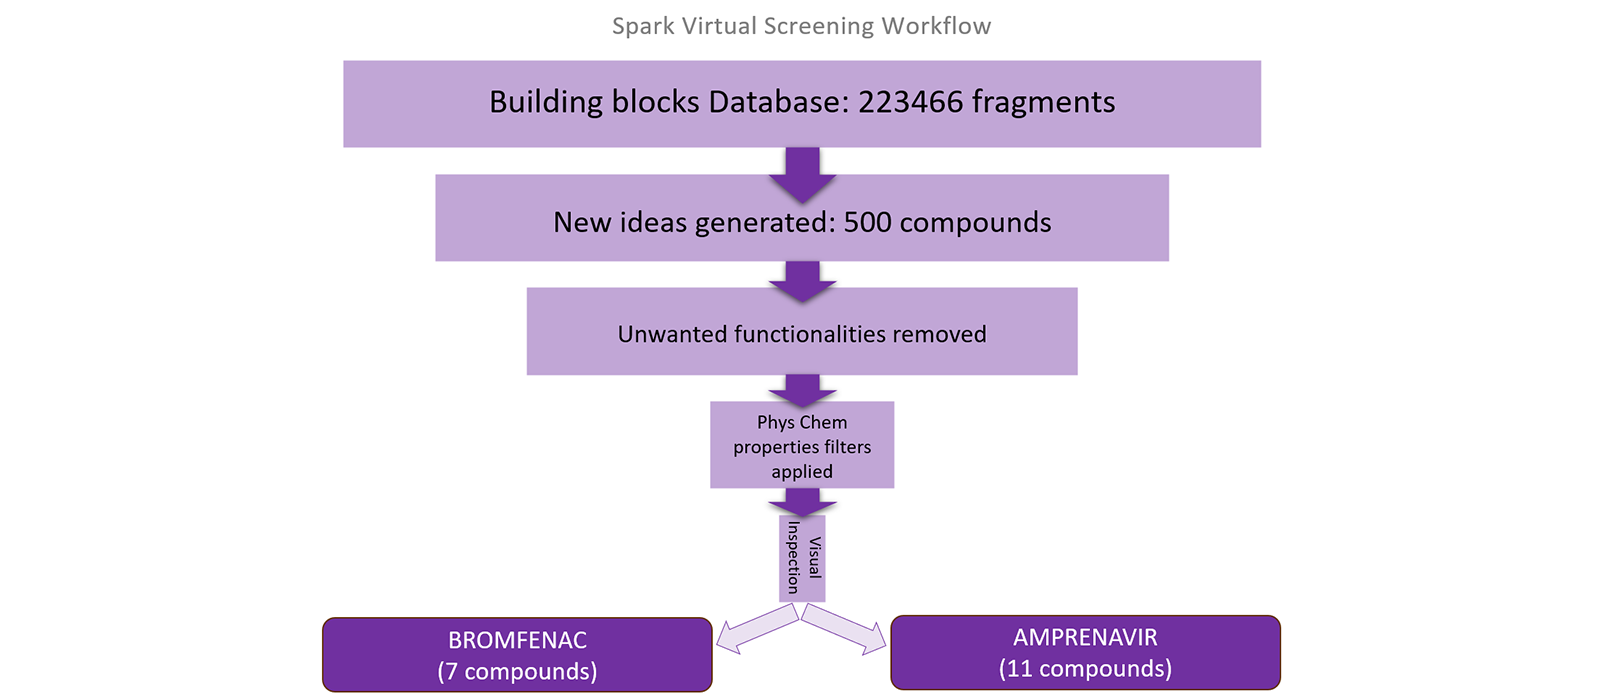 Figure 2. A Spark Virtual Screening workflow to replace an aniline chemical group